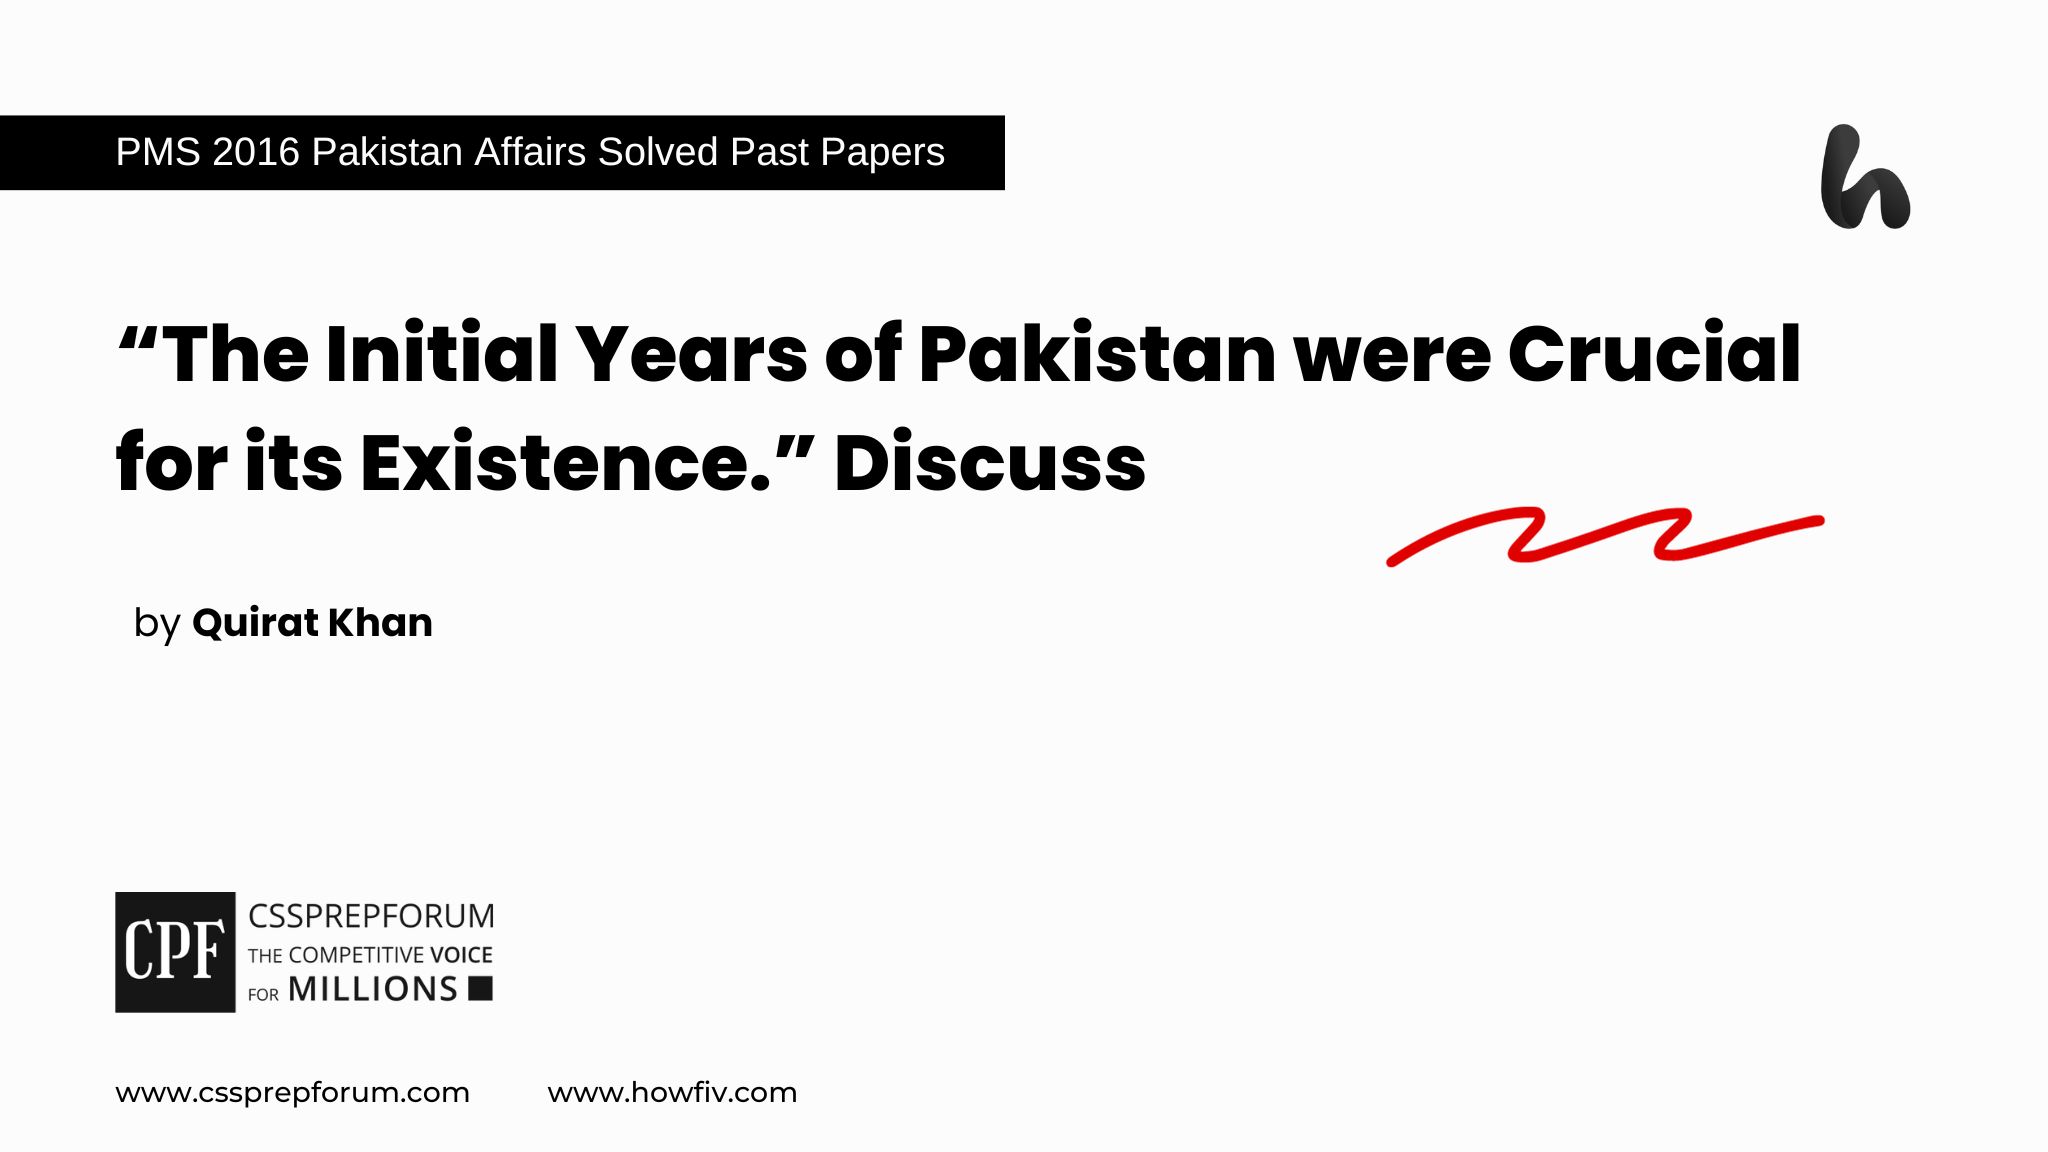 “The Initial Years of Pakistan were Crucial for its Existence.” Discuss